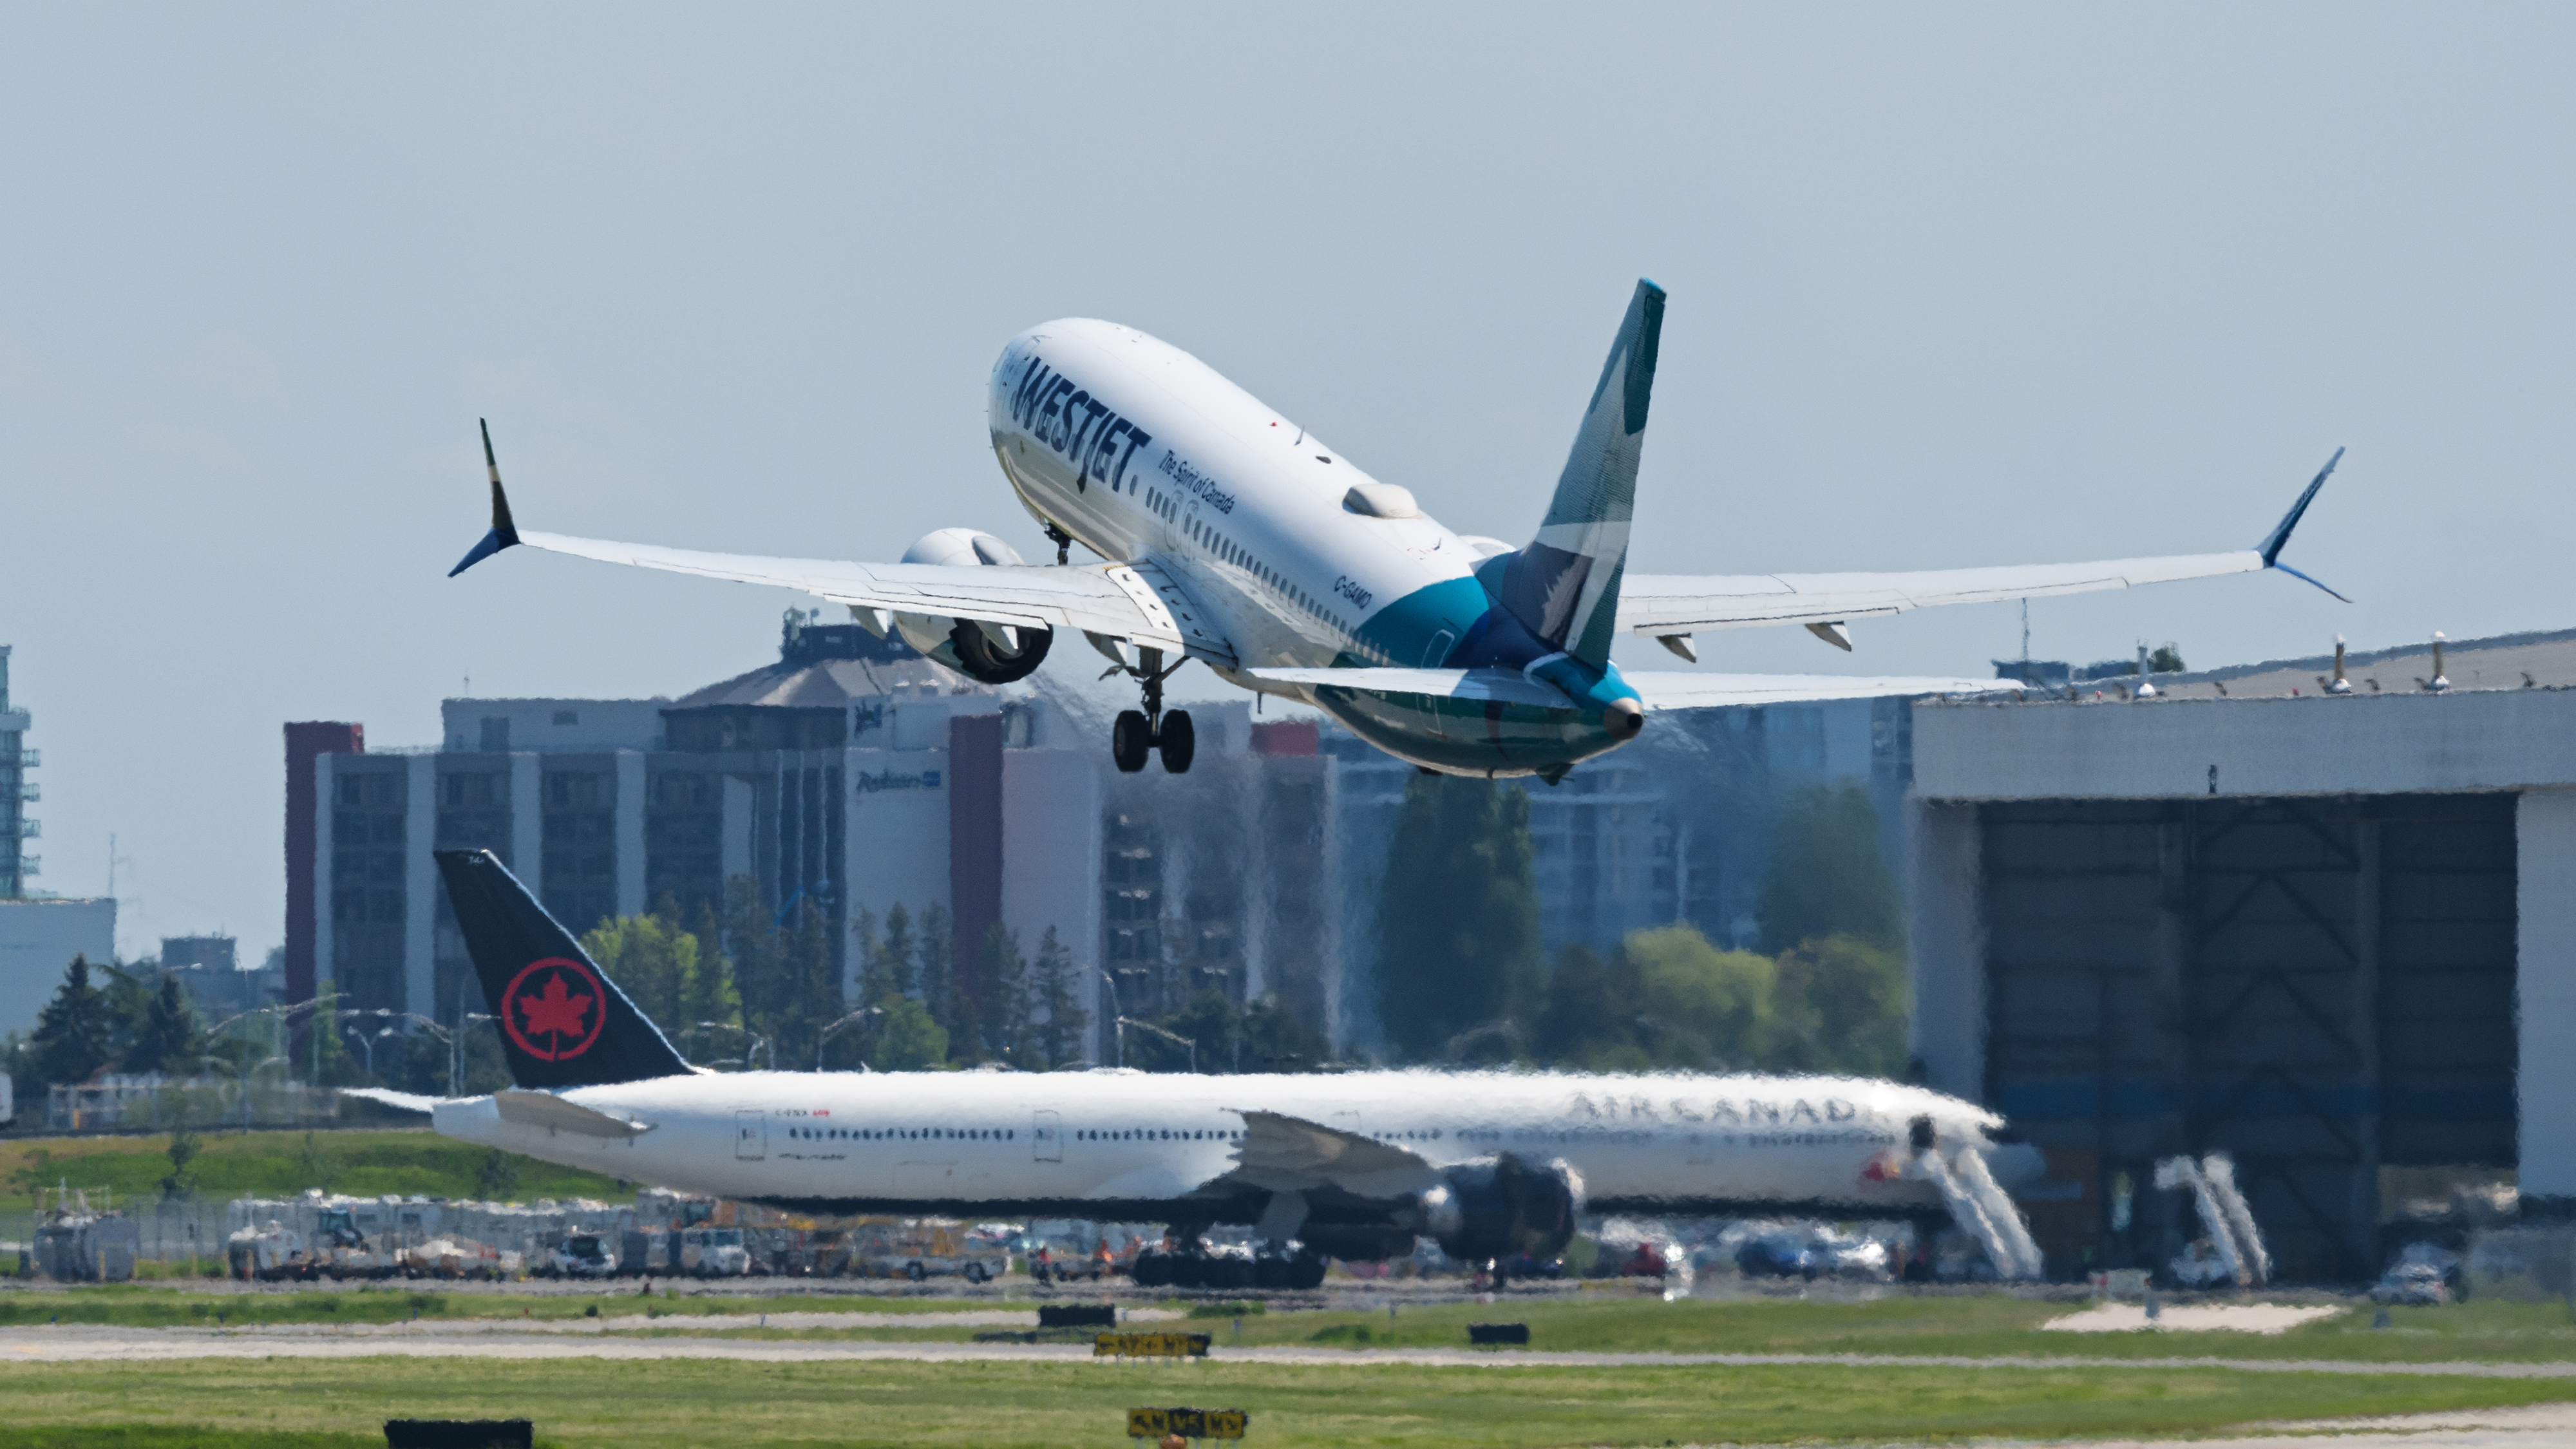 Canada grounded Boeing MAX-8s after chance encounter led to new data: docs